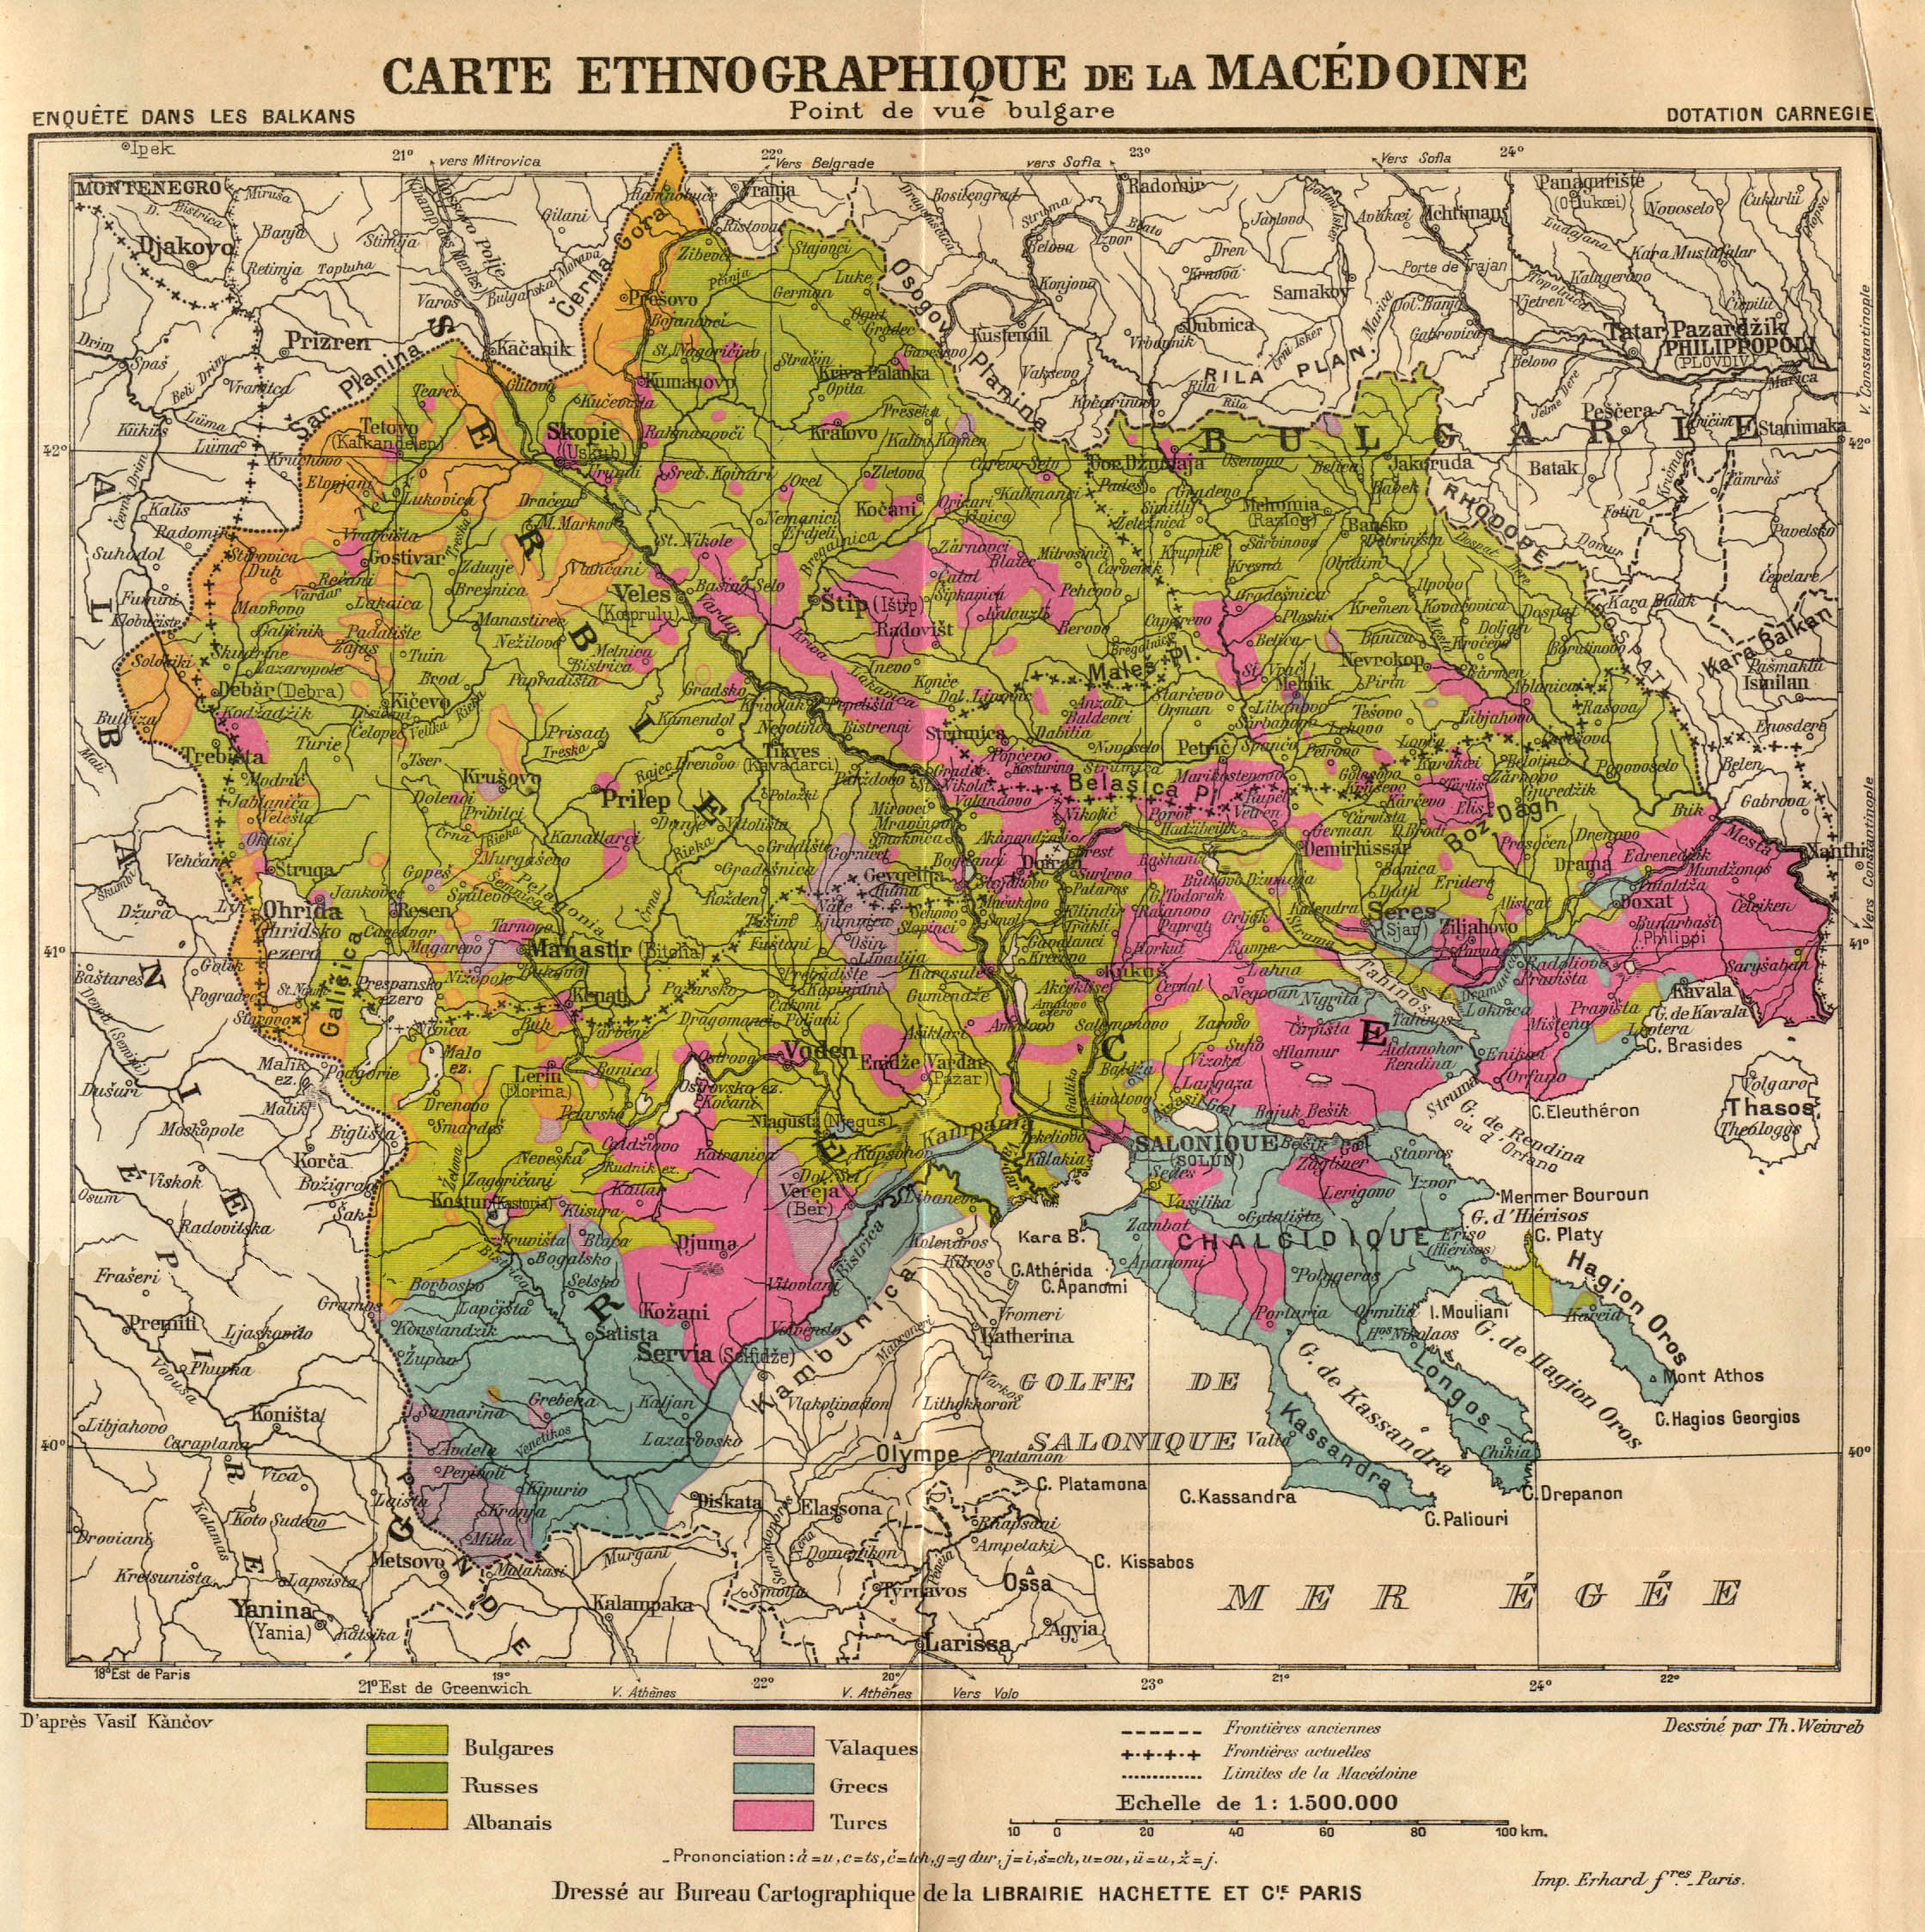 Map of Macedonia from the point of view of the Bulgarians 1914